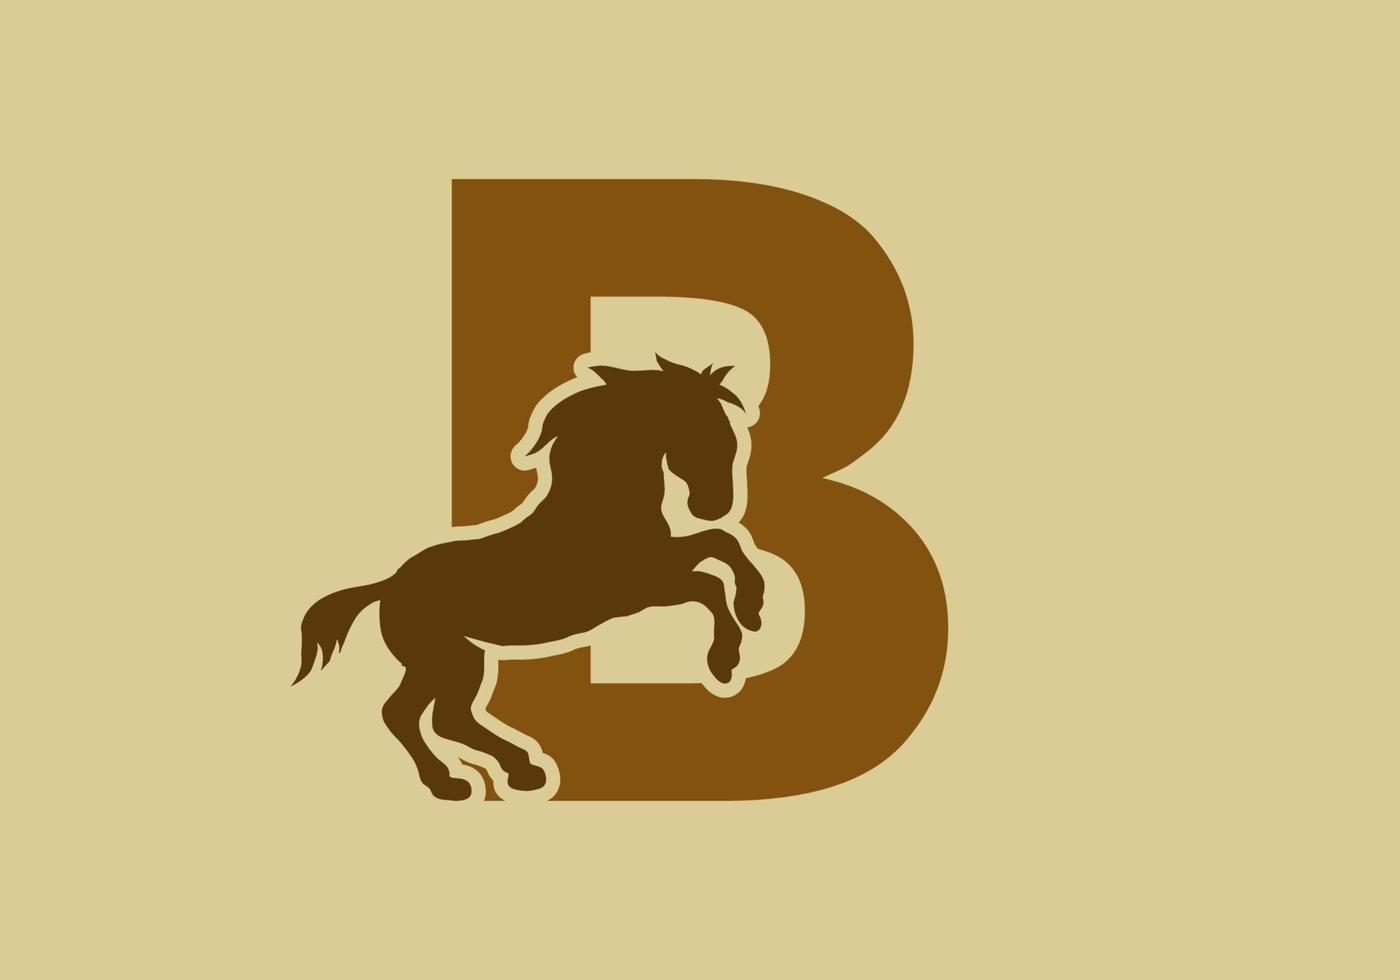 Initial letter B with horse shape vector